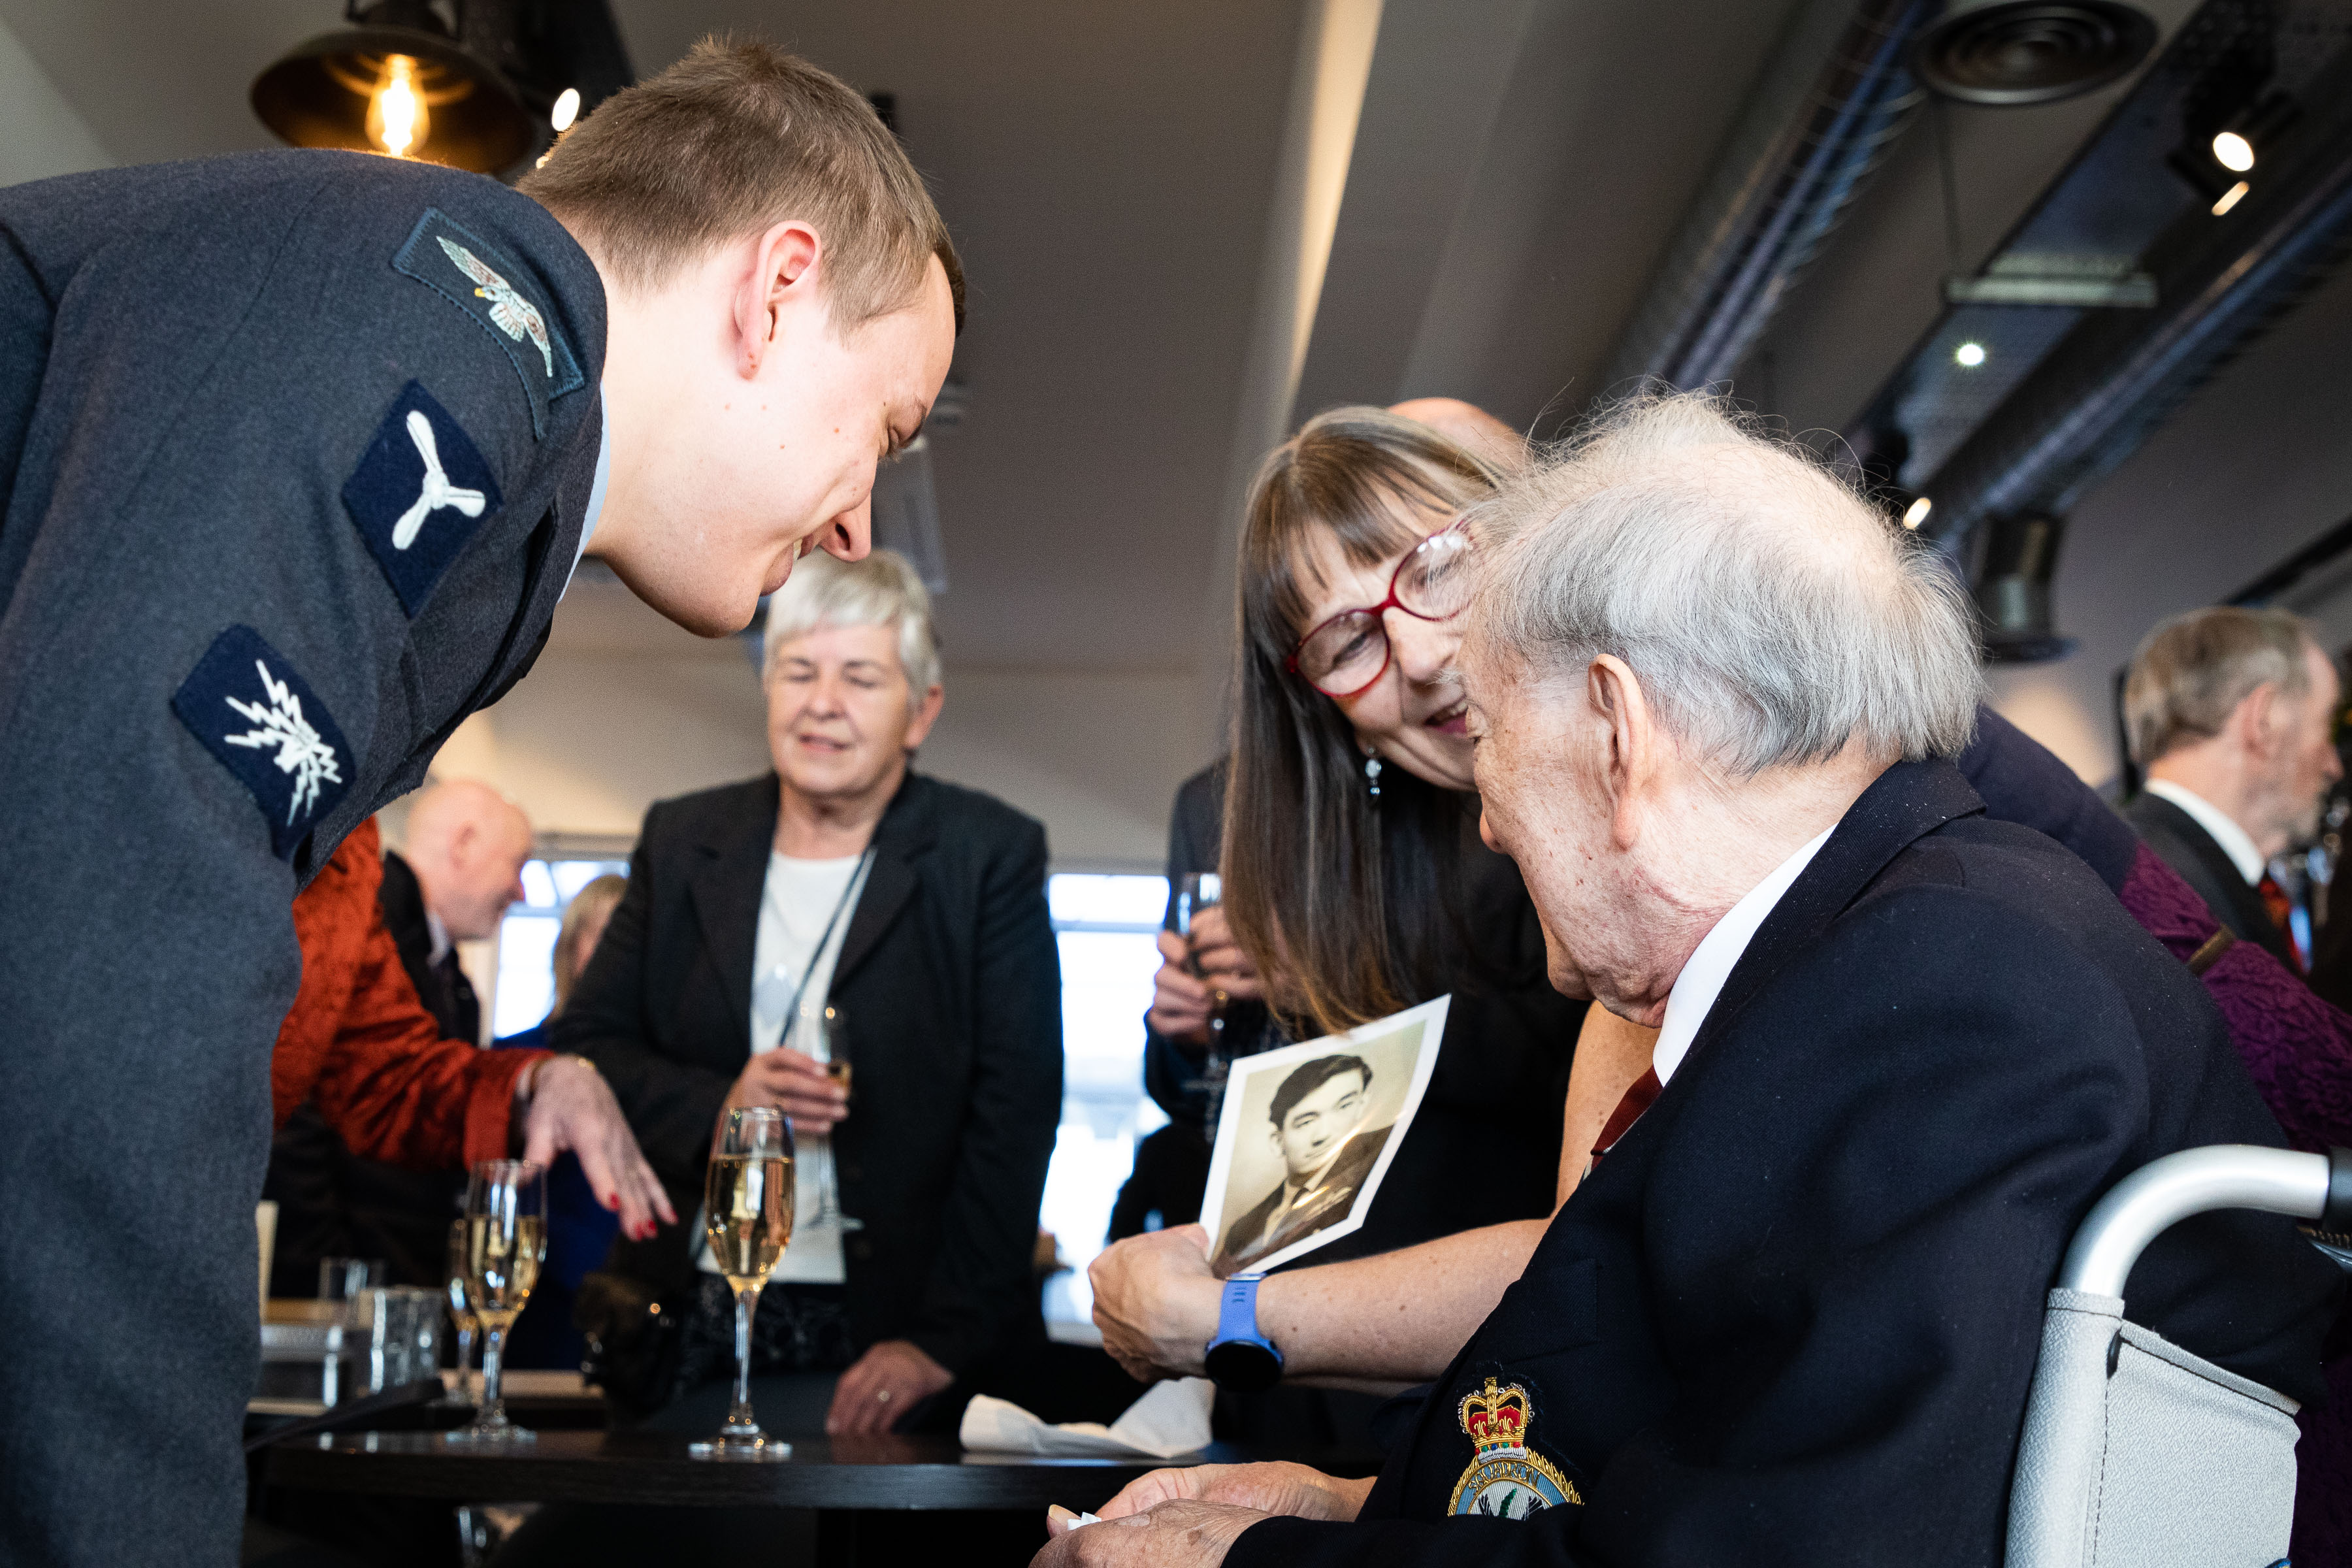 Image shows RAF aviators and veteran looking at black and white picture.